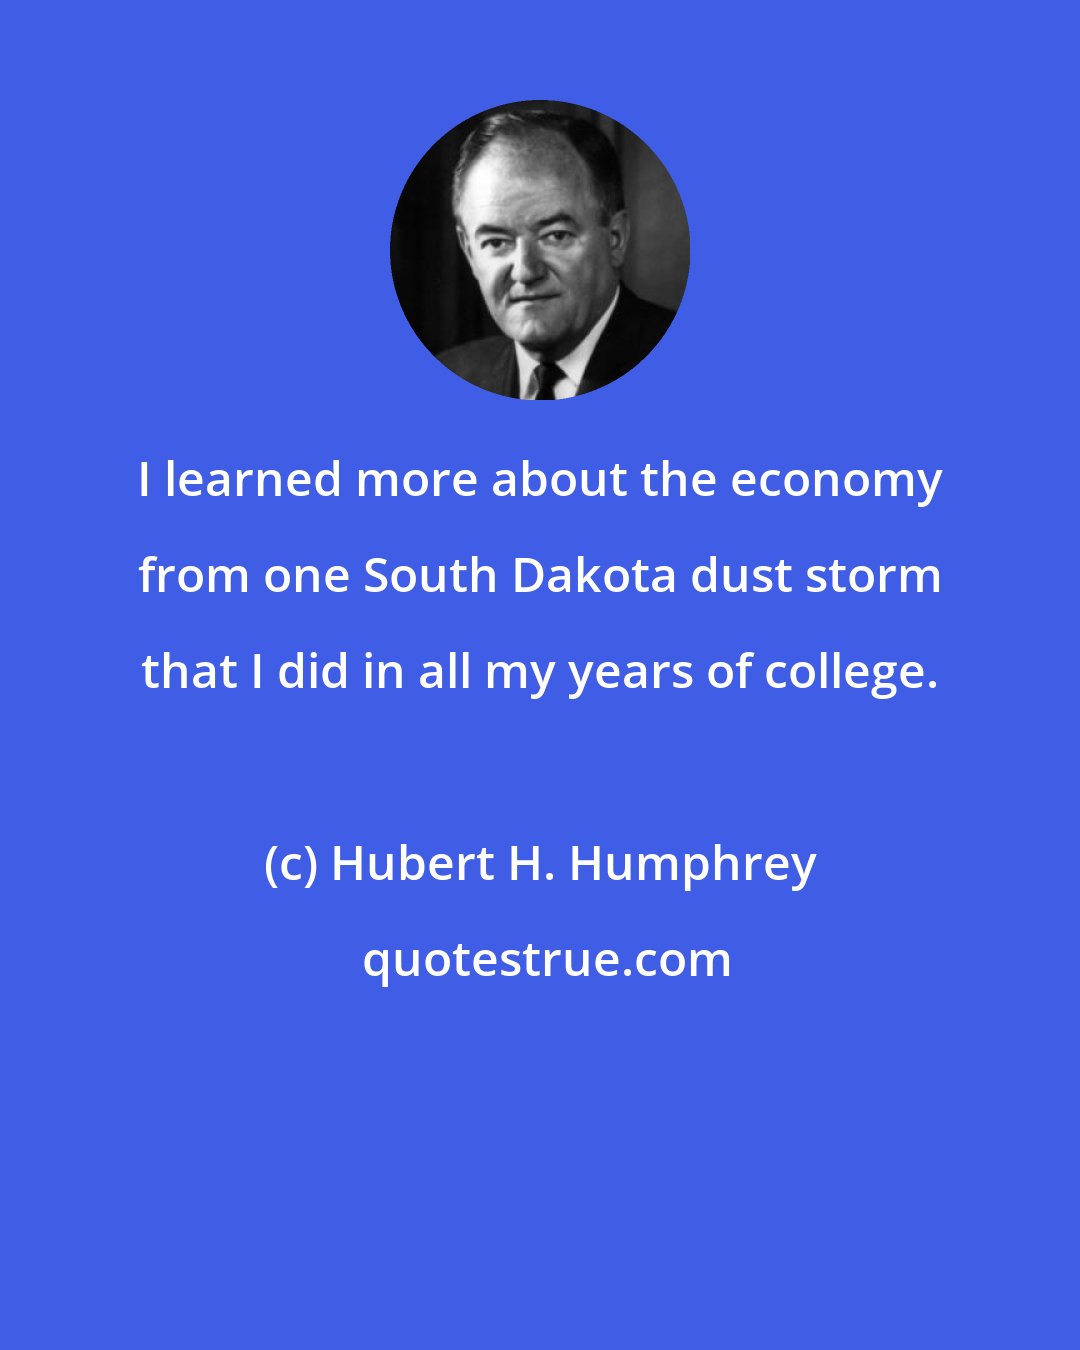 Hubert H. Humphrey: I learned more about the economy from one South Dakota dust storm that I did in all my years of college.